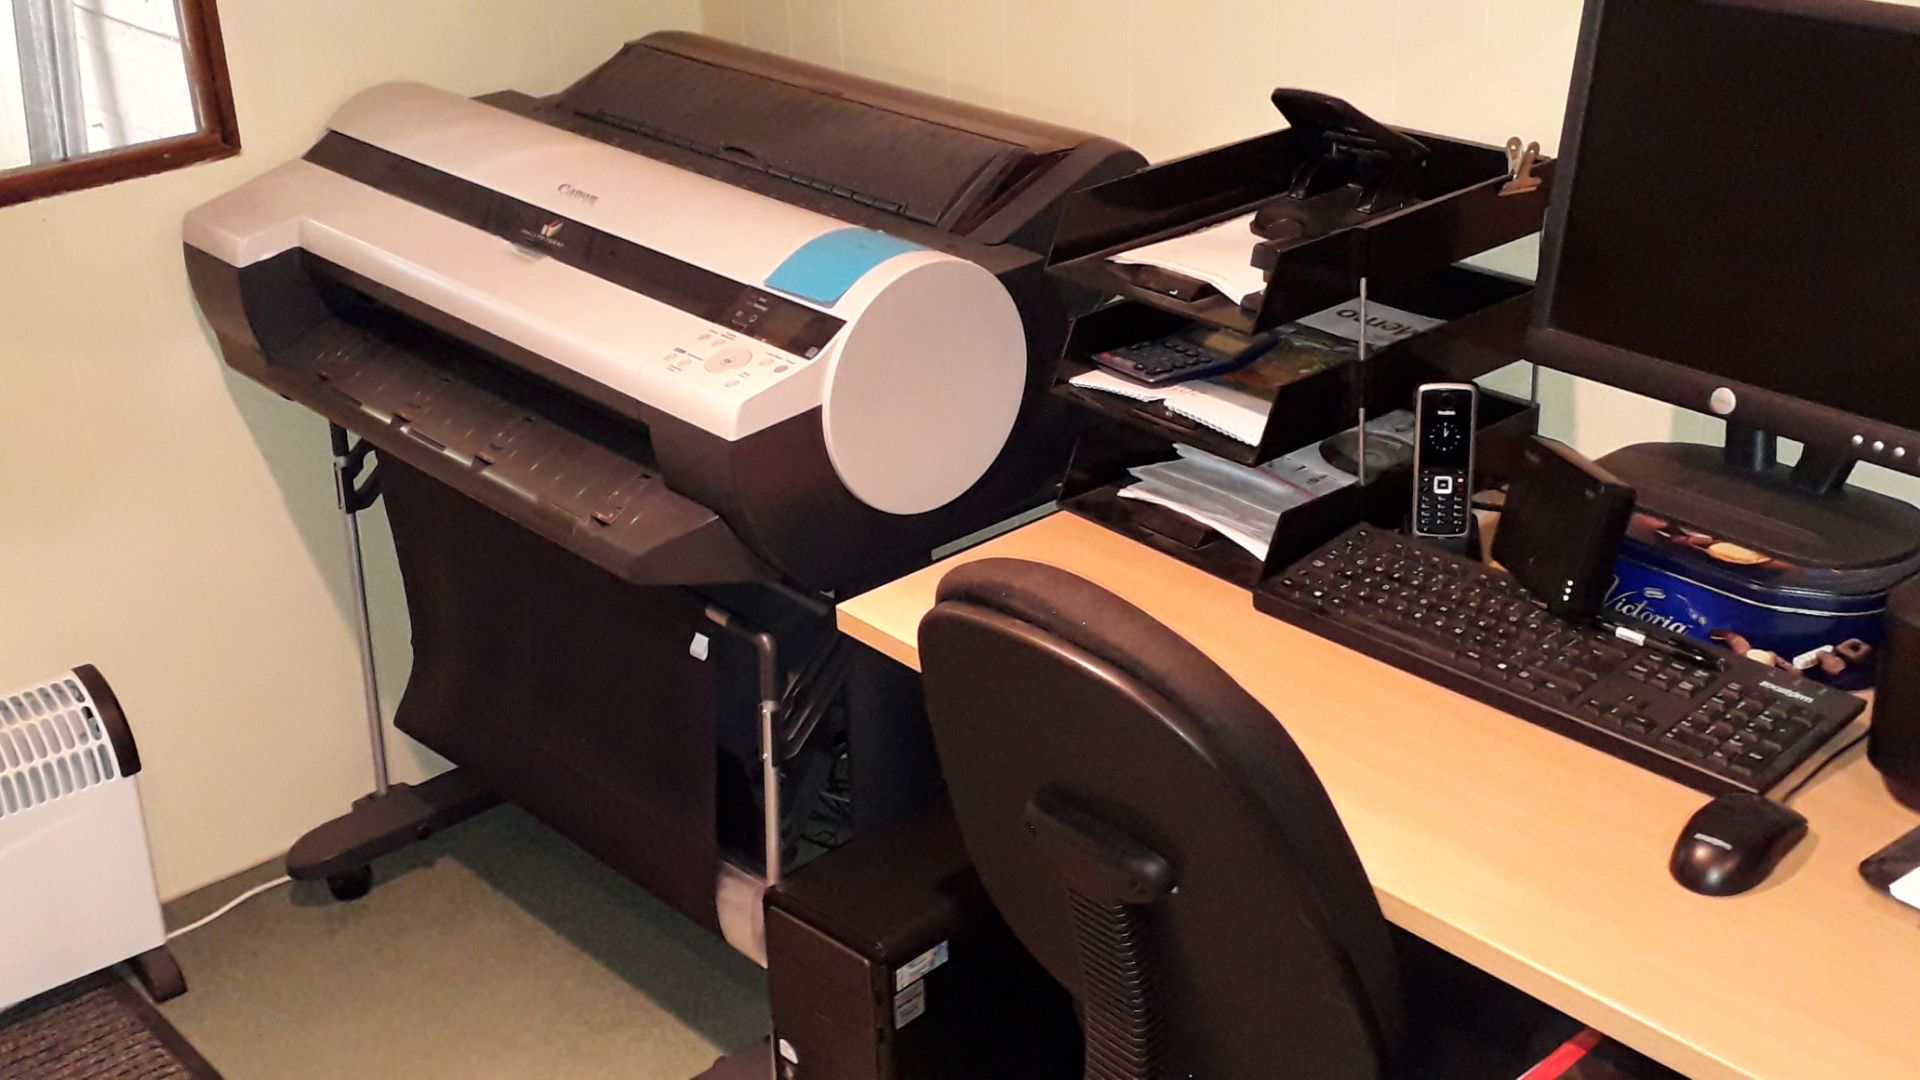 Contents of Office to include, Canon ImagePrograf IPF605 Plotter, Canon Pixma MG2550 Printer, 2 x